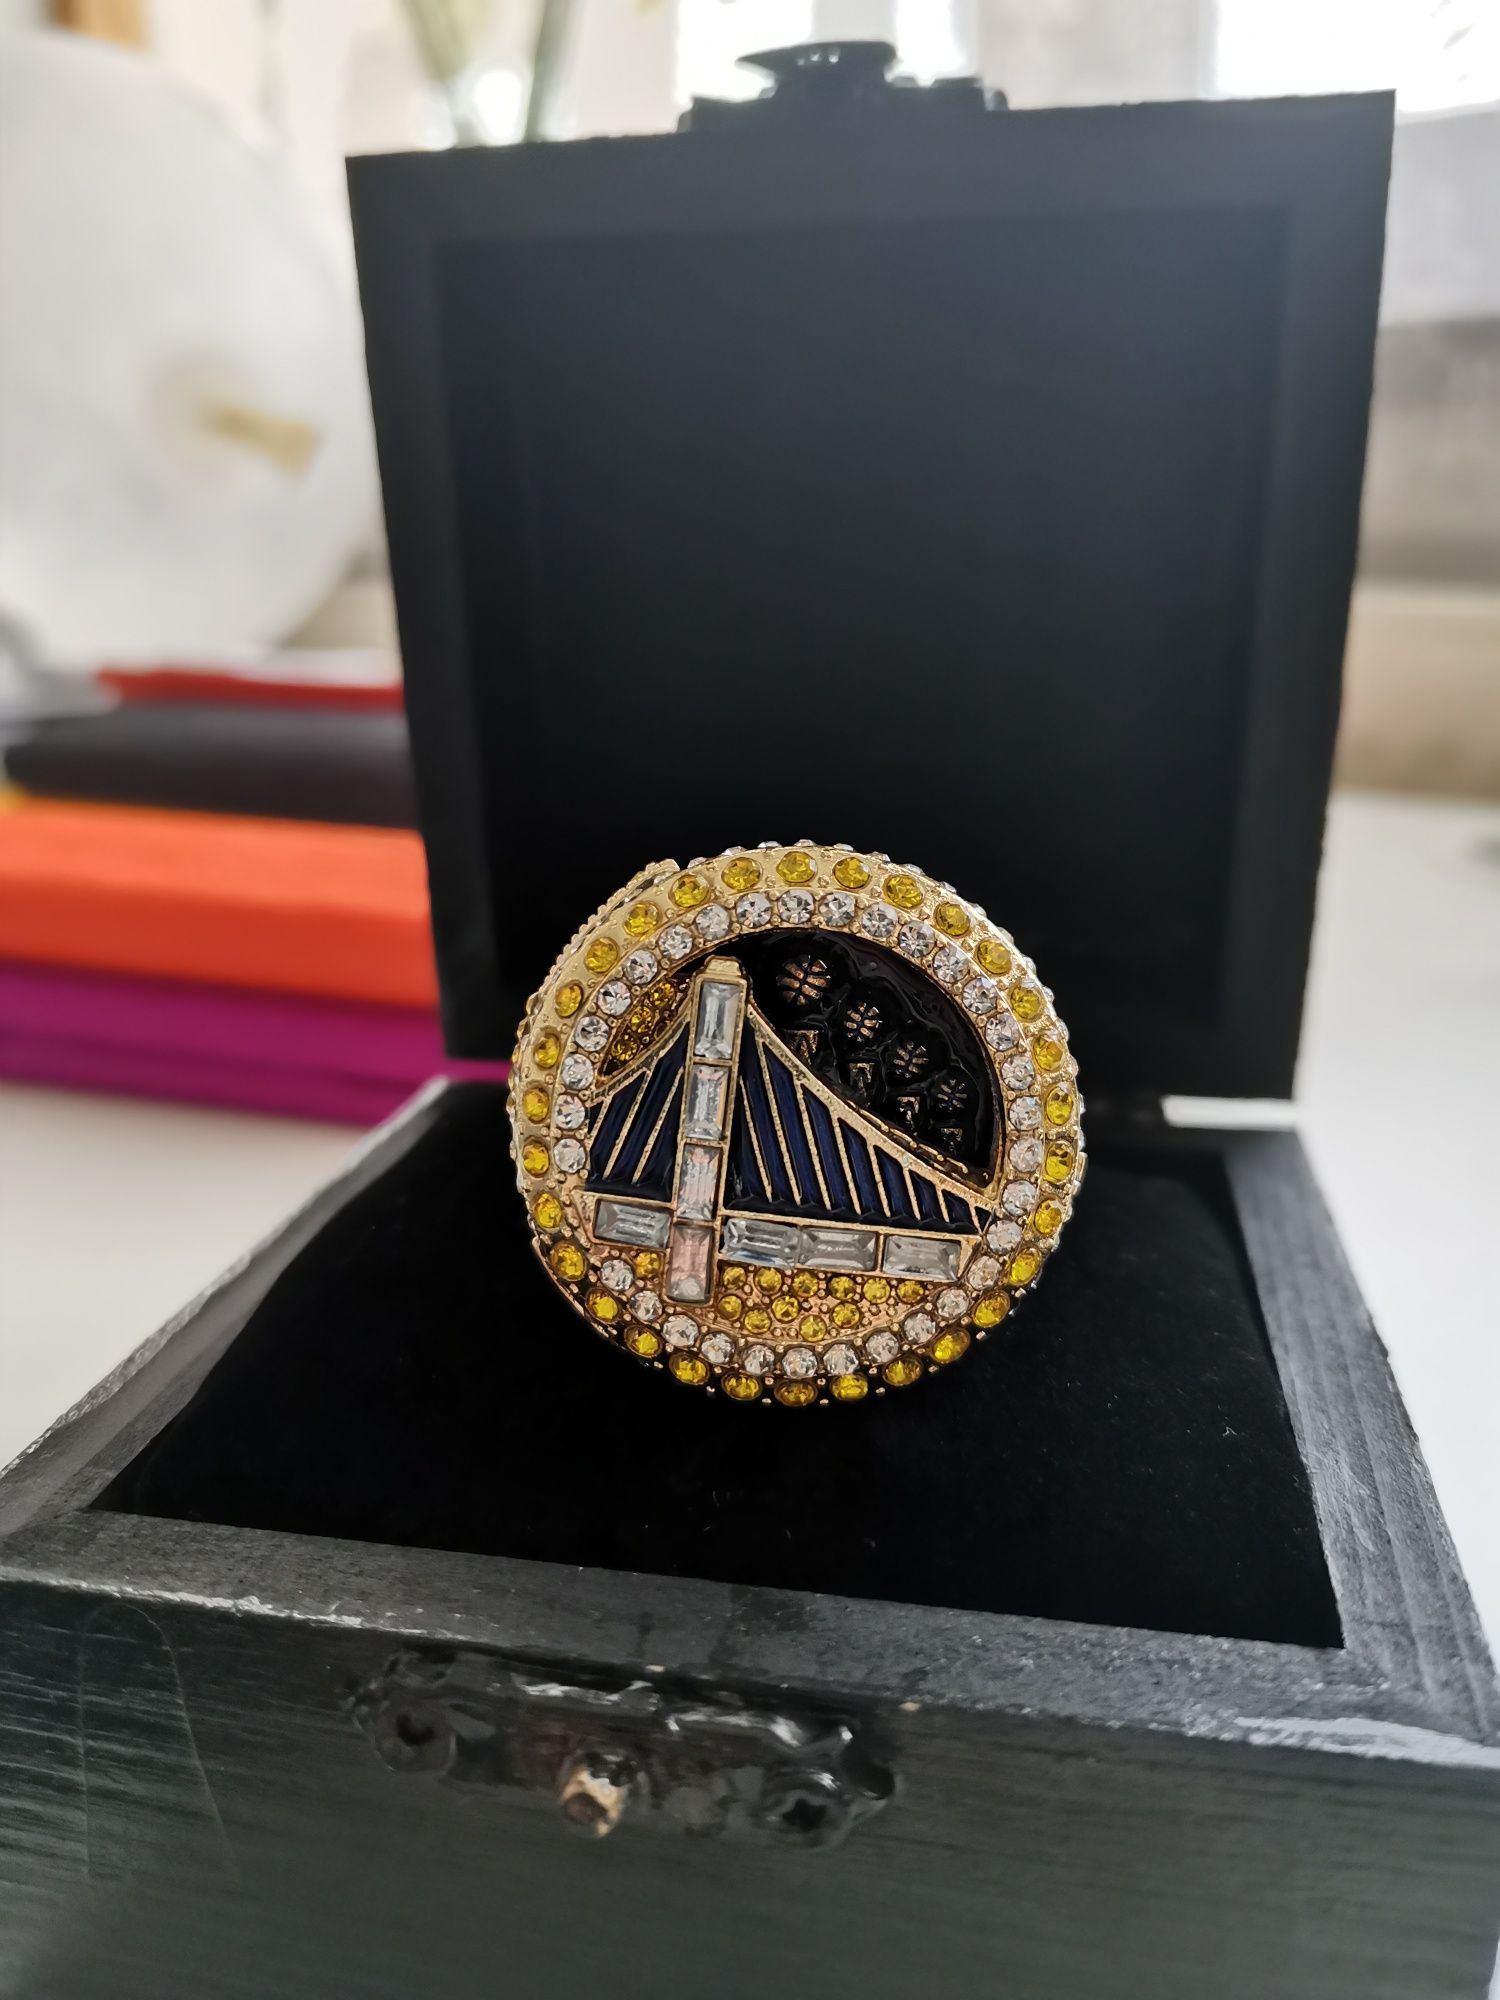 Stephen Curry Golden State Warriors championship ring 2022